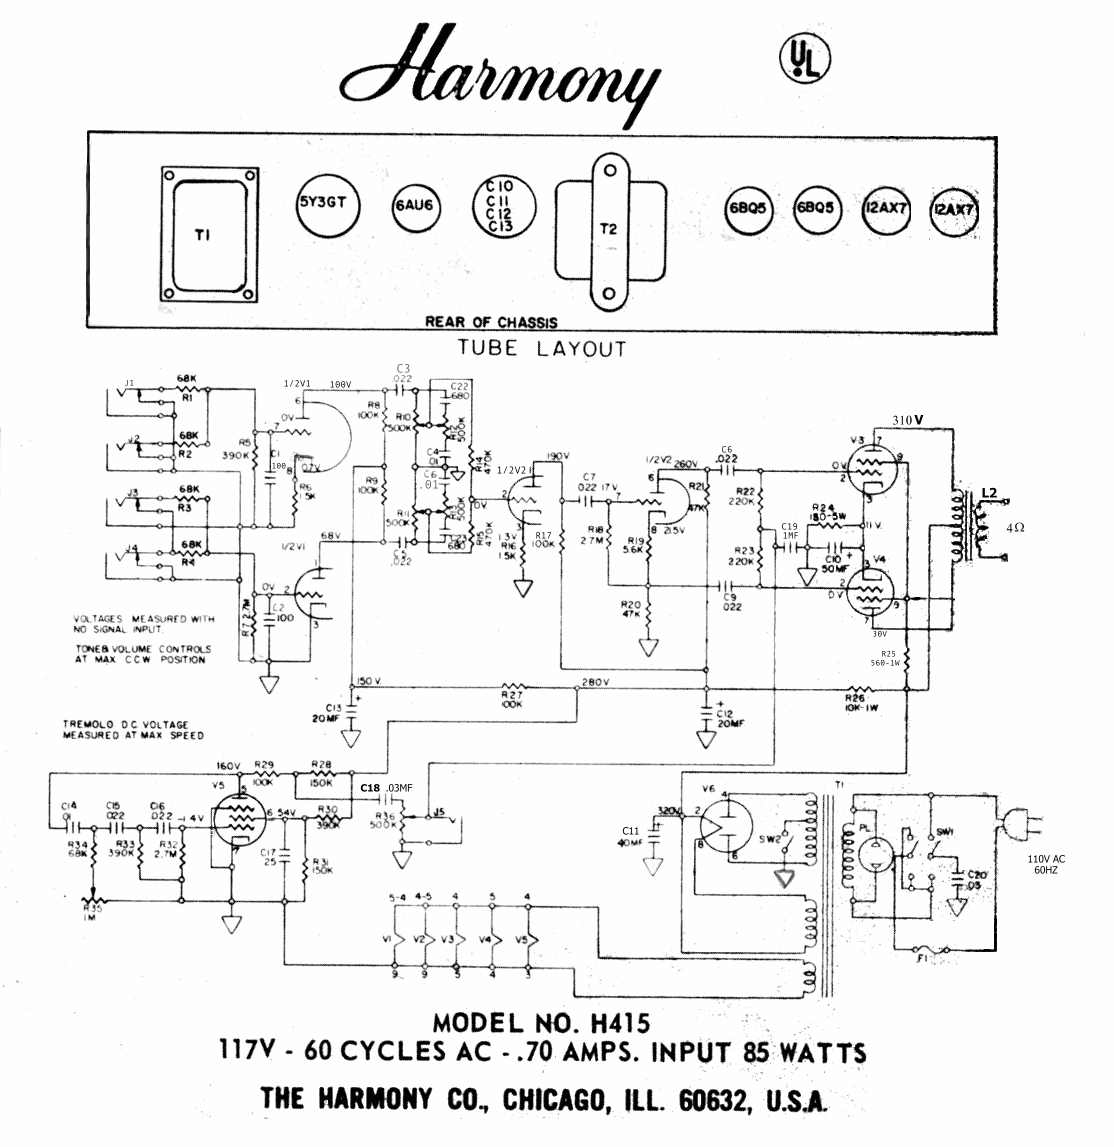 Harmony Electric Guitar Wiring Diagram from harmony.demont.net